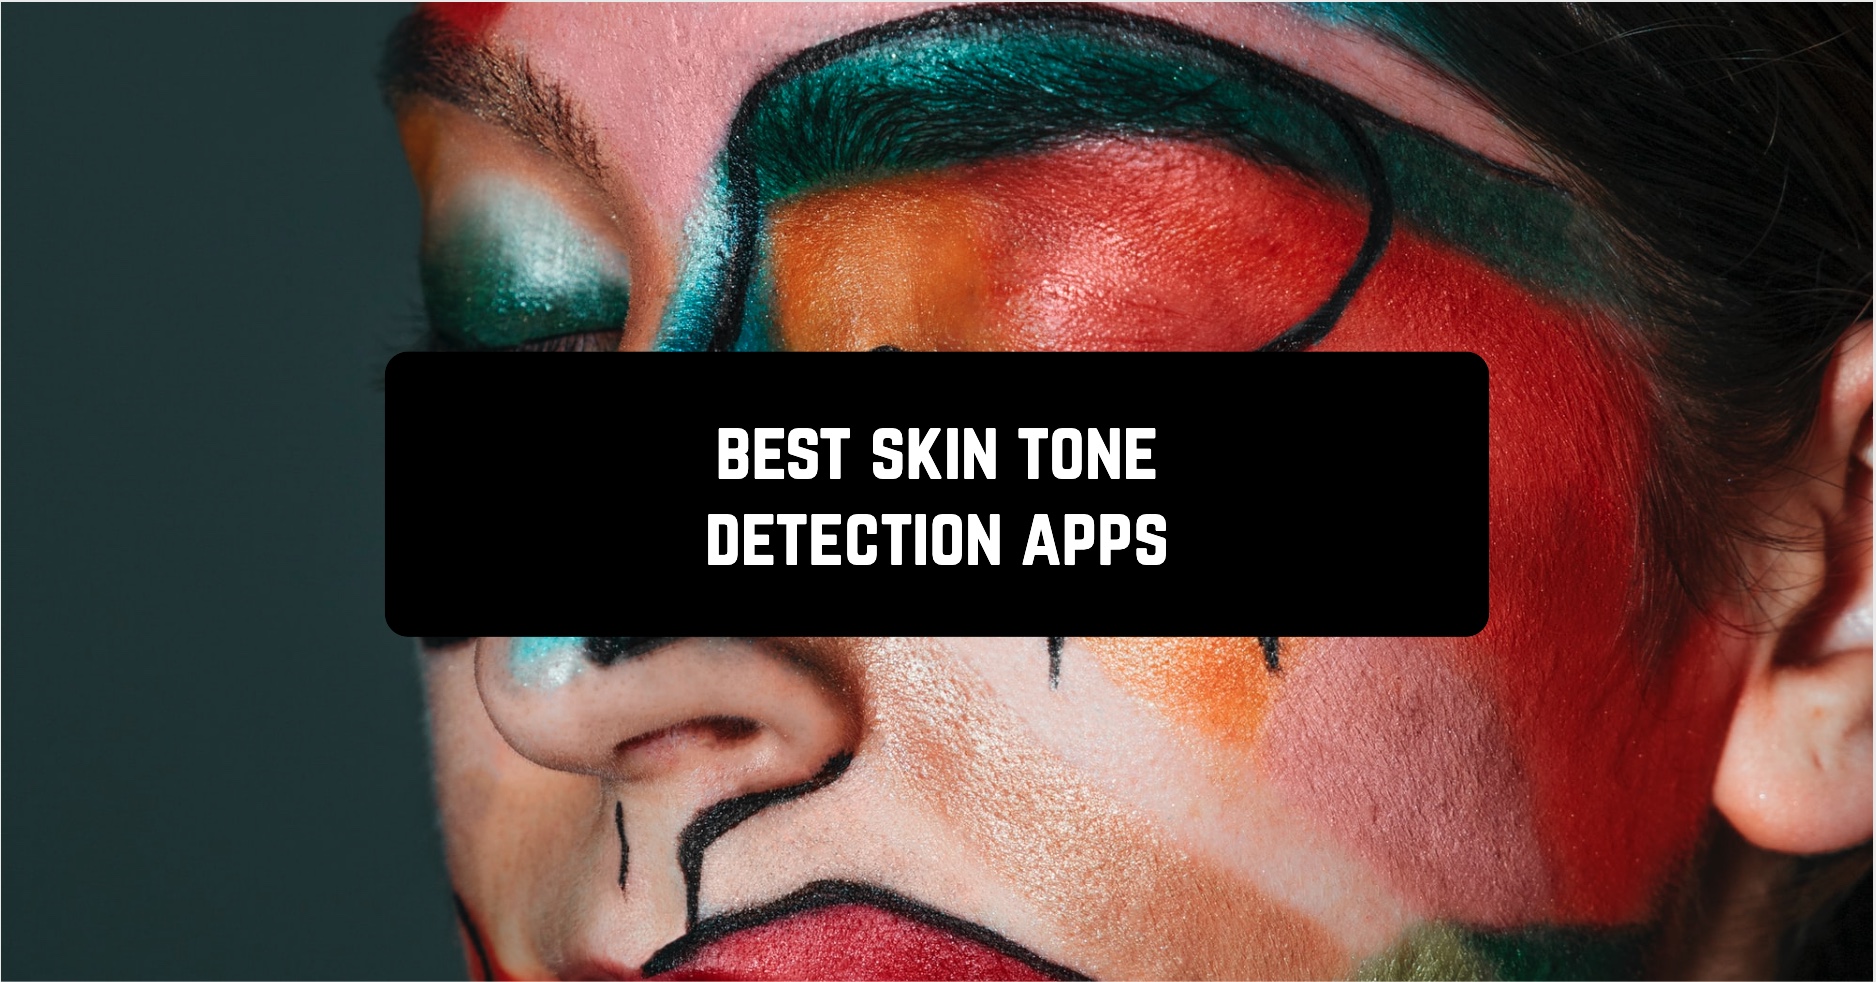 Best skin tone detection apps